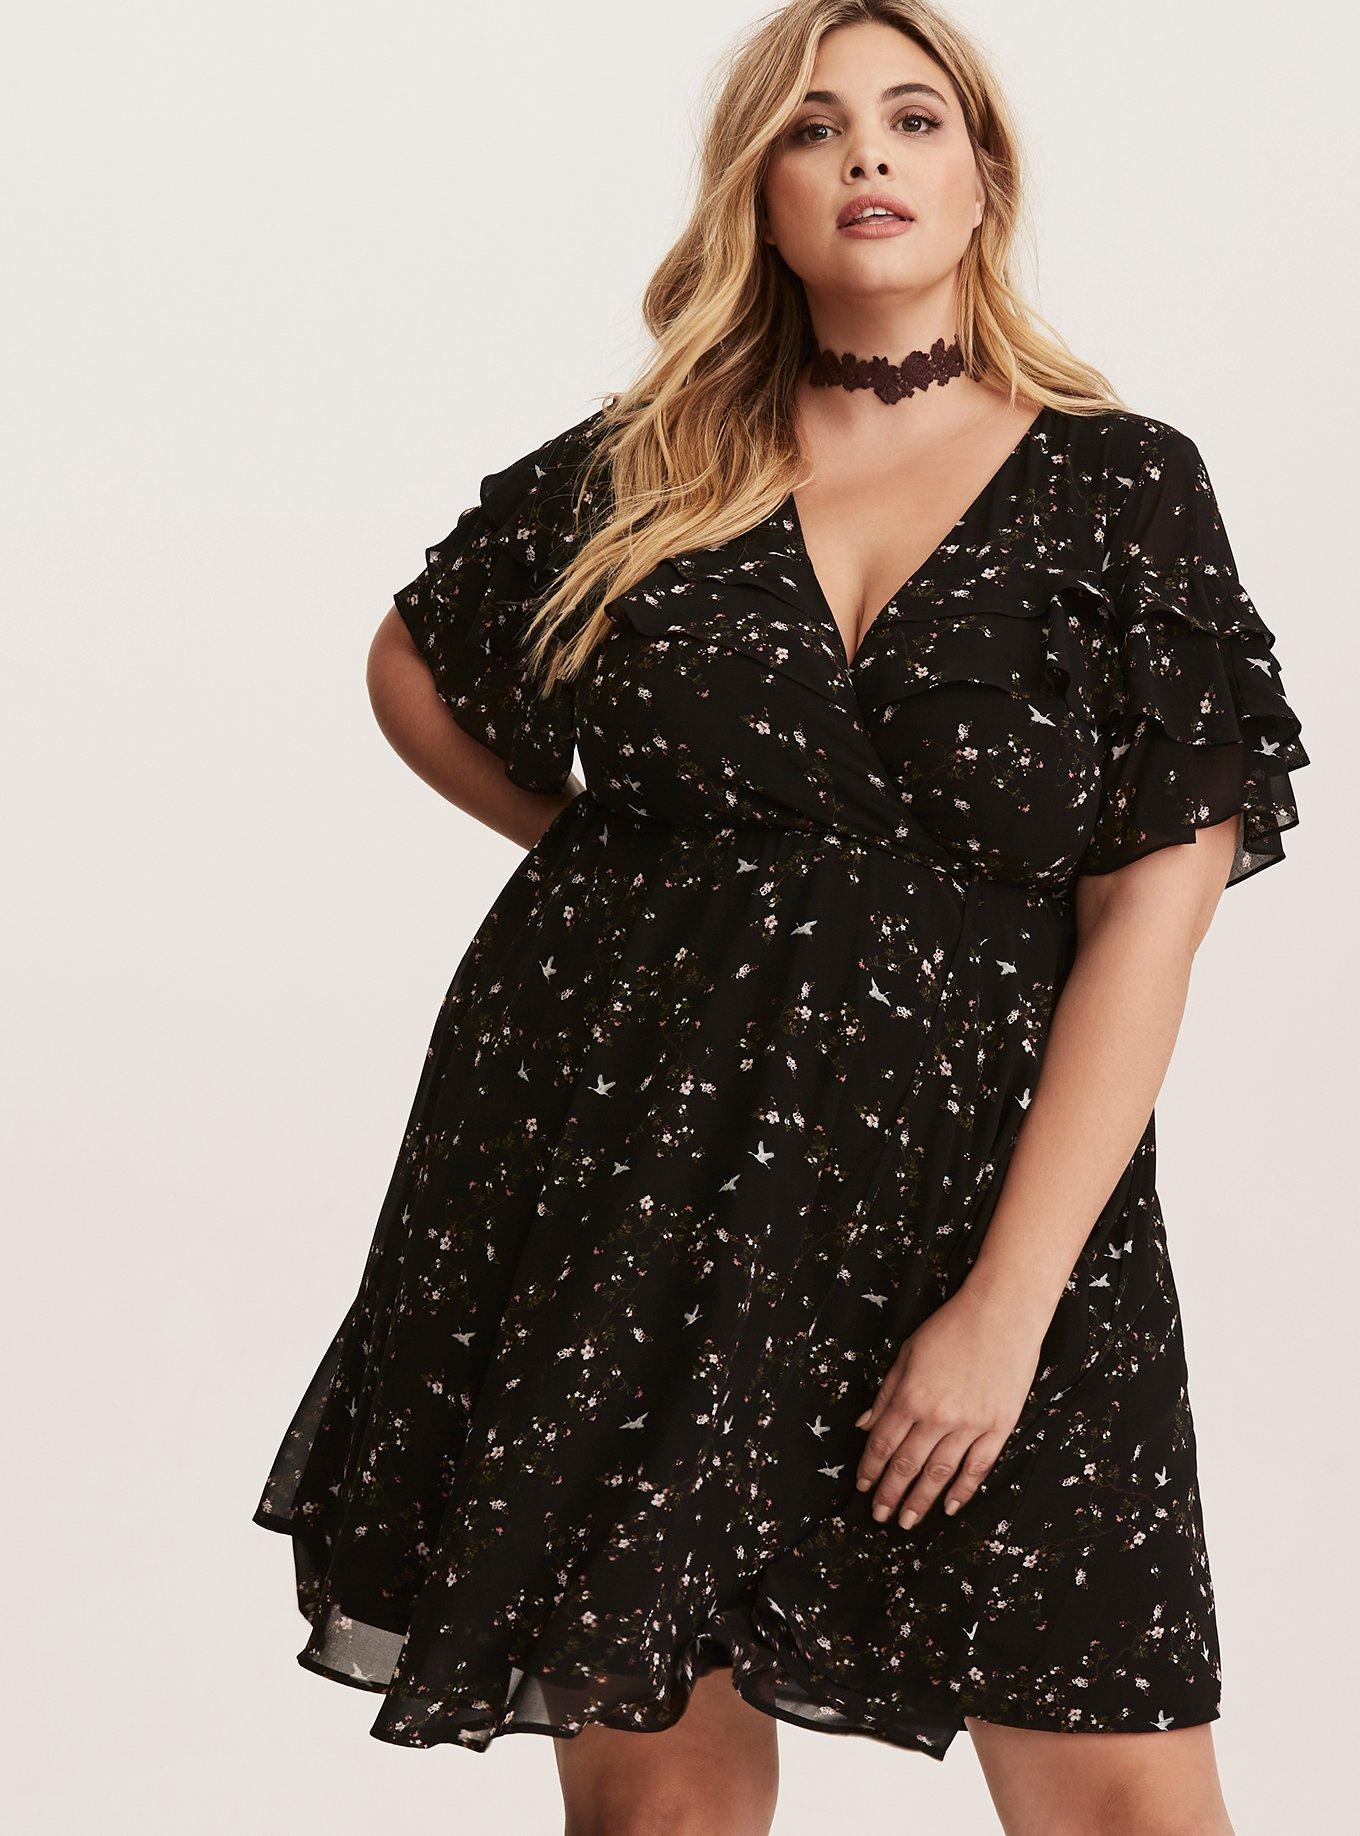 Torrid Plus Size In The Dressing Room PREVIEW